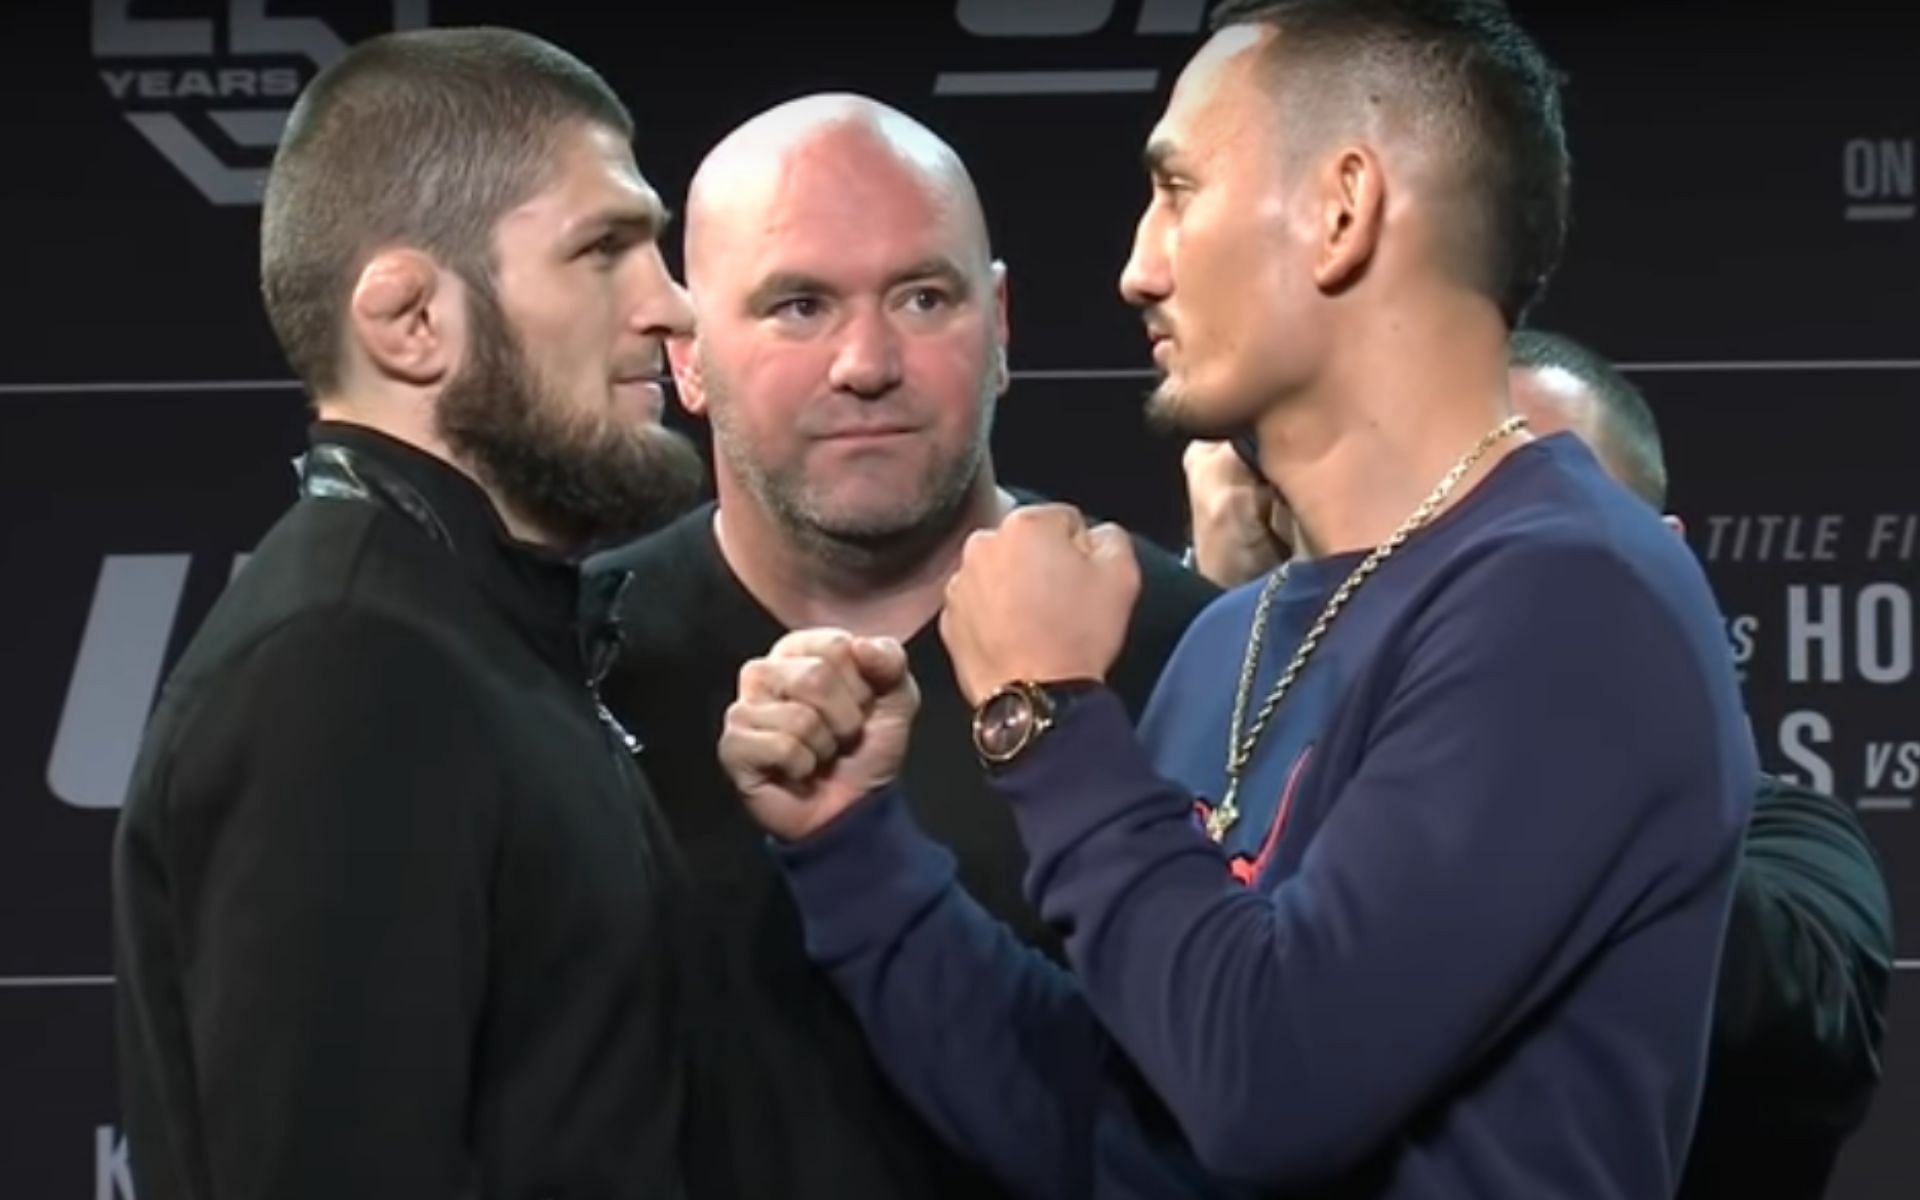 Khabib Nurmagomedov and Max Holloway were scheduled to fight in 2018 [Image Credit: UFC on YouTube]